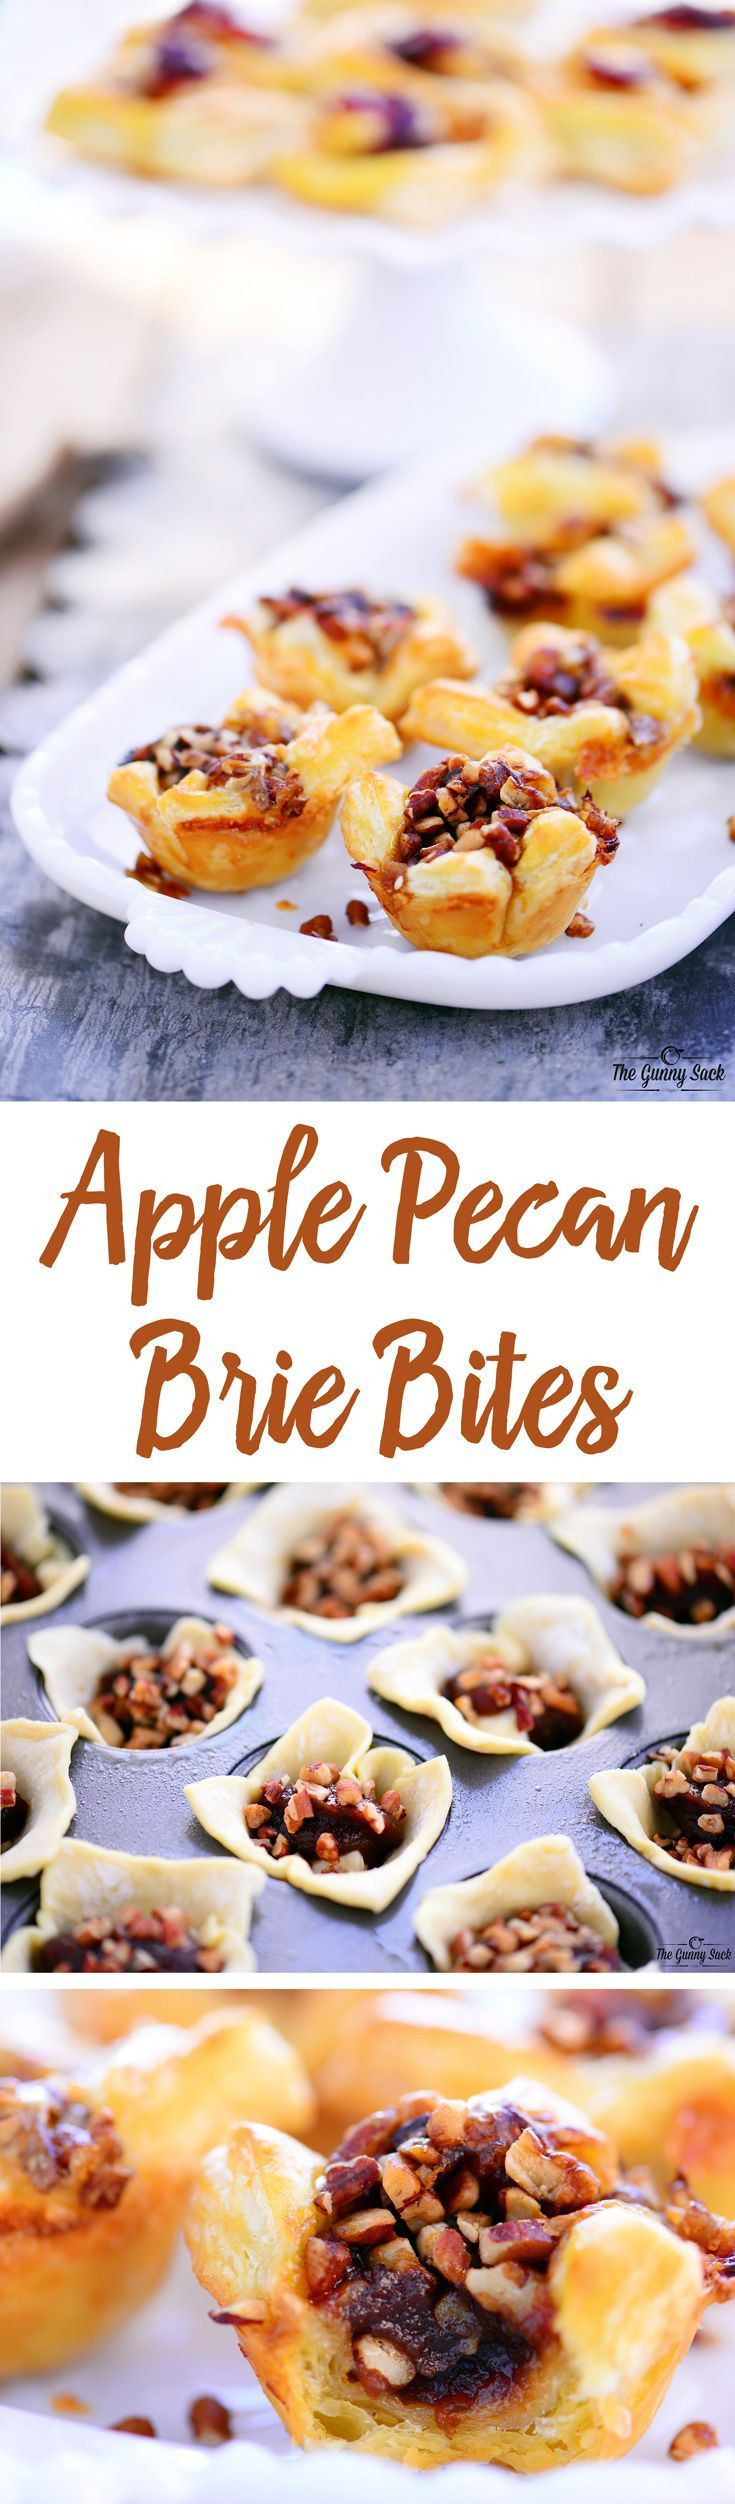 Apple Appetizer Recipes
 This yummy Apple Pecan Brie Bites recipe is an easy